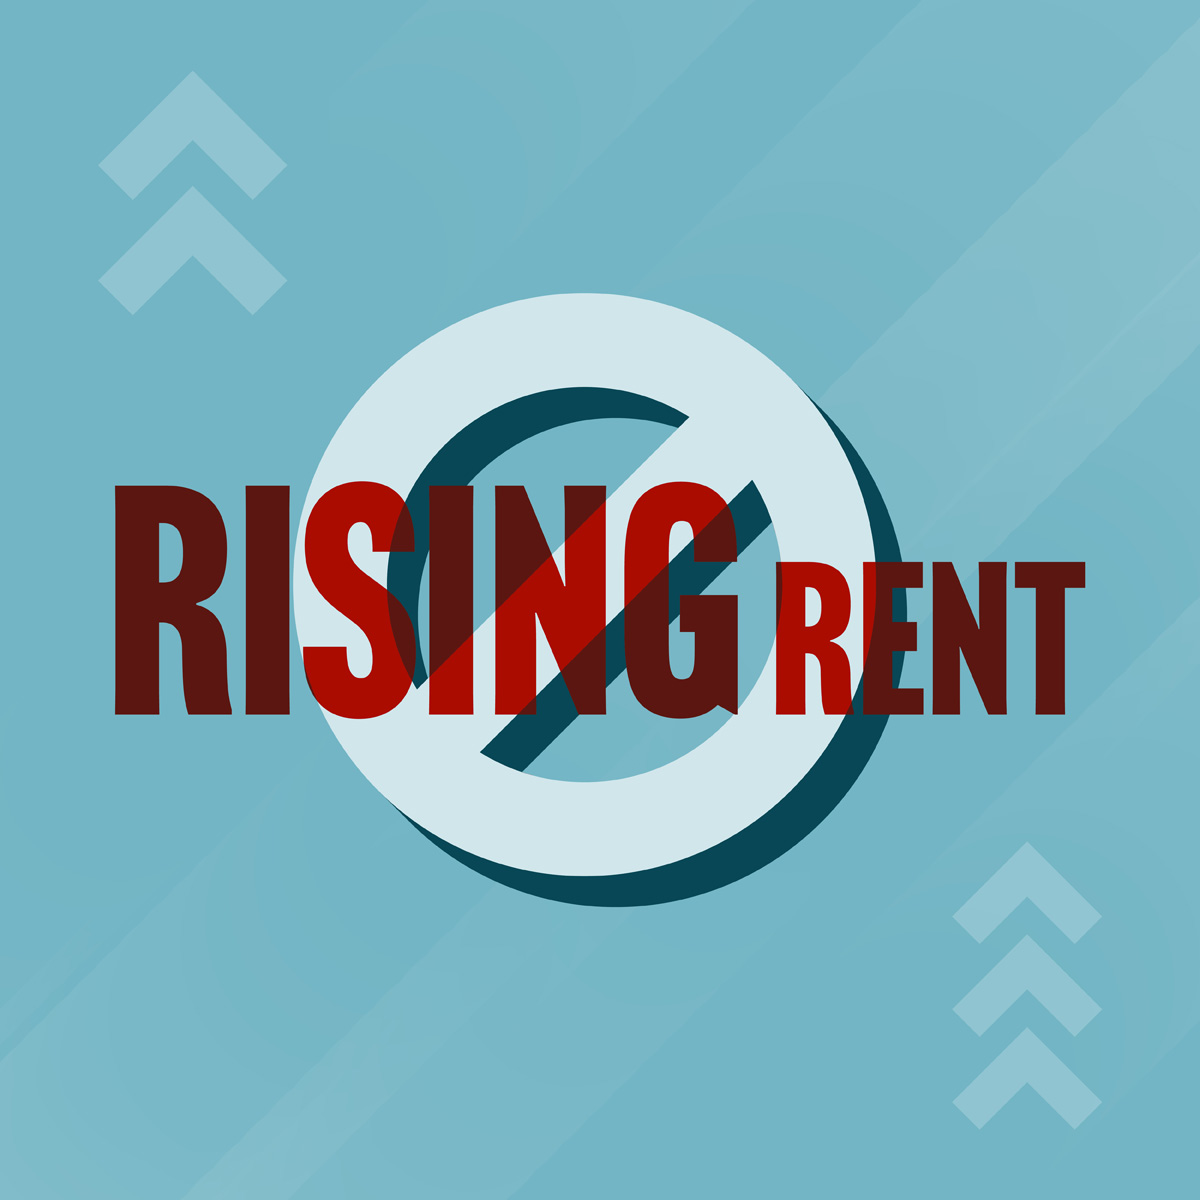 Is your rent on the rise? Stop overpaying for a space that you don't own and invest in yourself! Reach out today 518-782-1202 to start the homebuying process. #ownvsrent #homeowner #buildequity #yourhome #dreamhome #stoprenting #firsttimehomebuyer